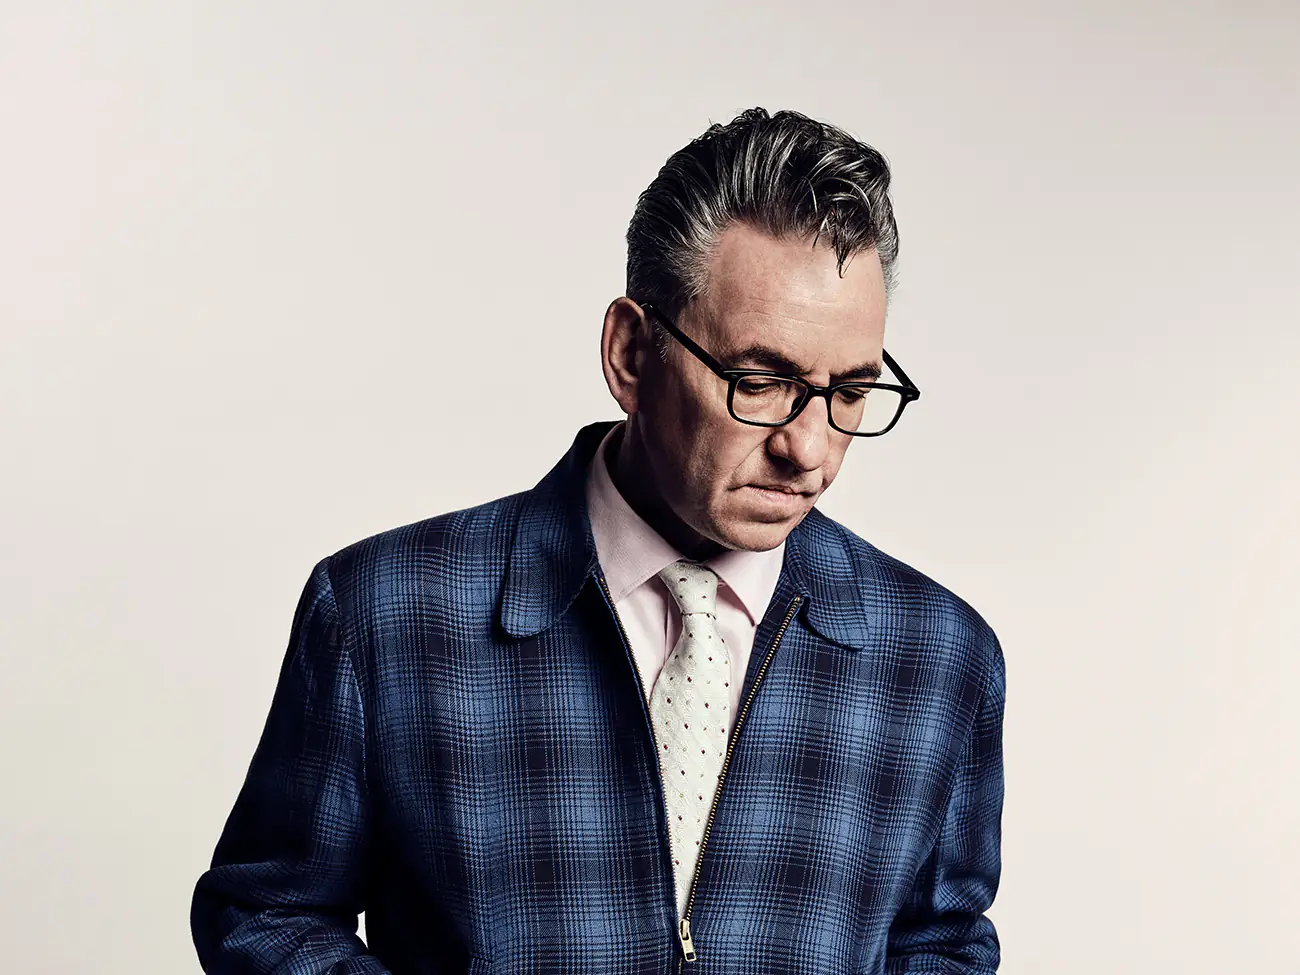 RICHARD HAWLEY announces new album ‘In This City They Call You Love’ & shares new single ‘Two For His Heels’